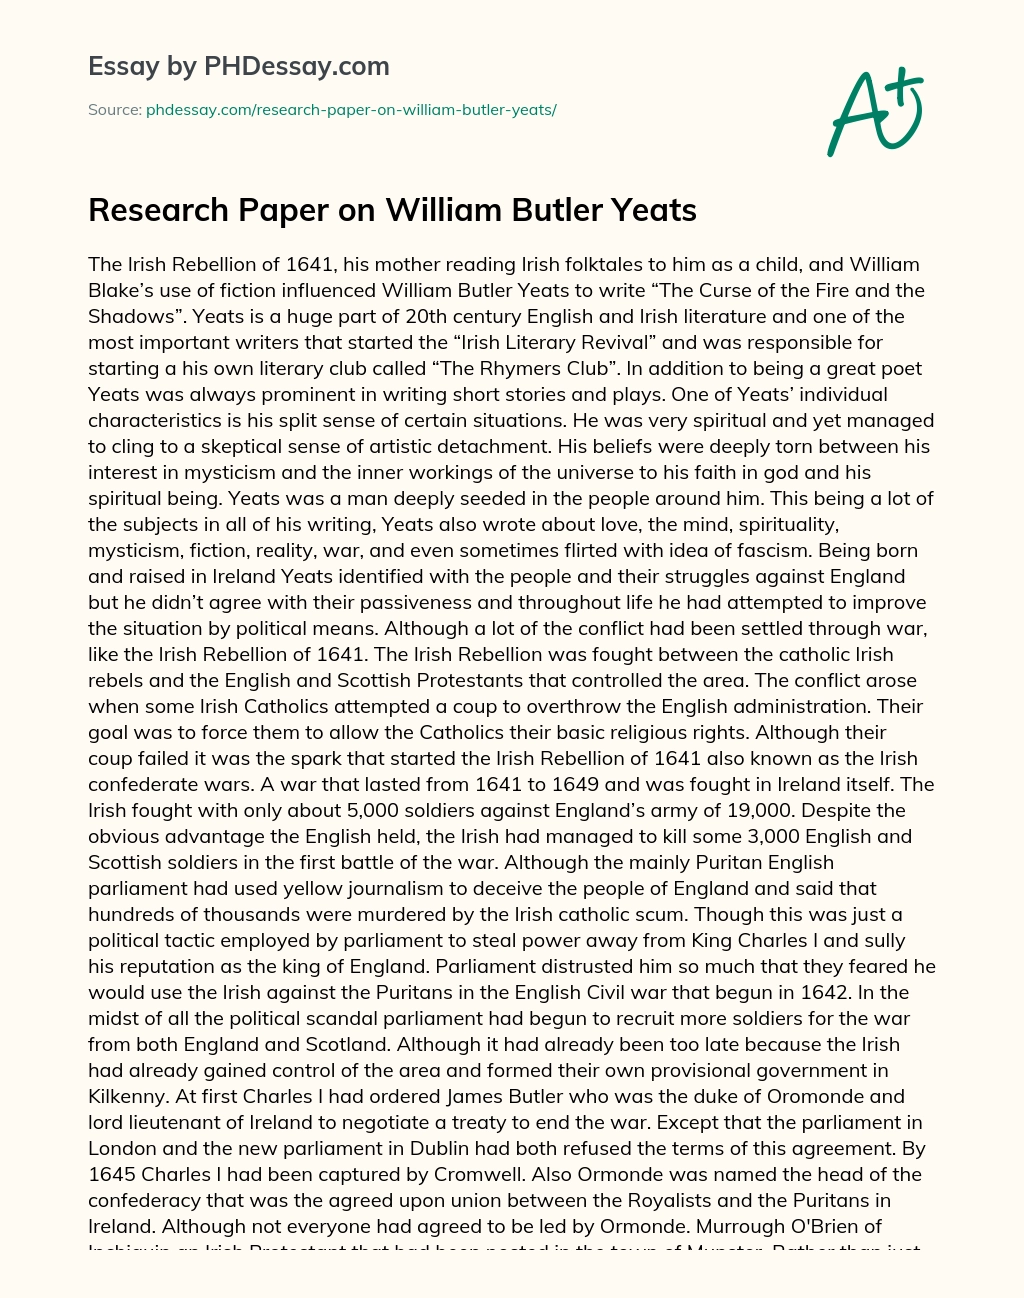 Research Paper on  William Butler Yeats essay